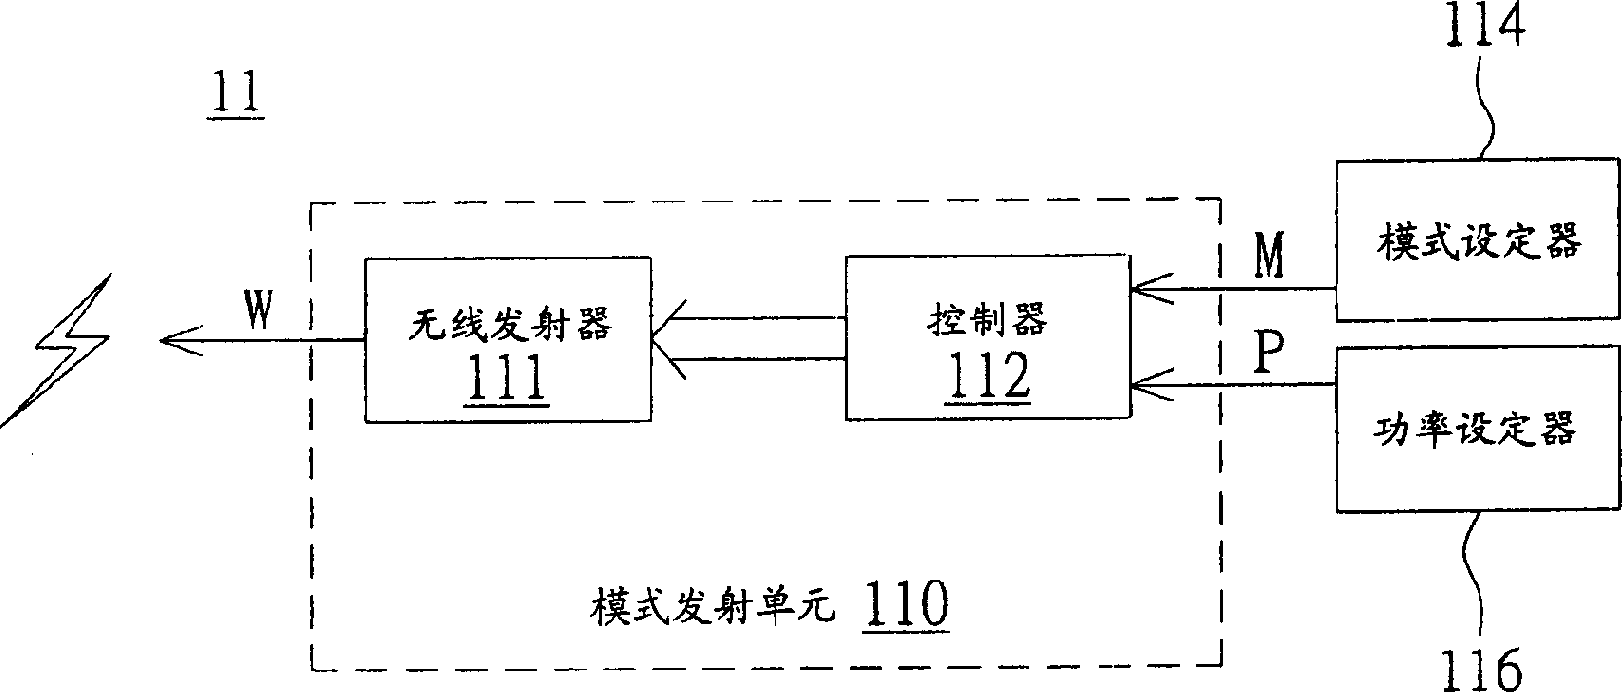 Operation mode control system and method for mobile phone